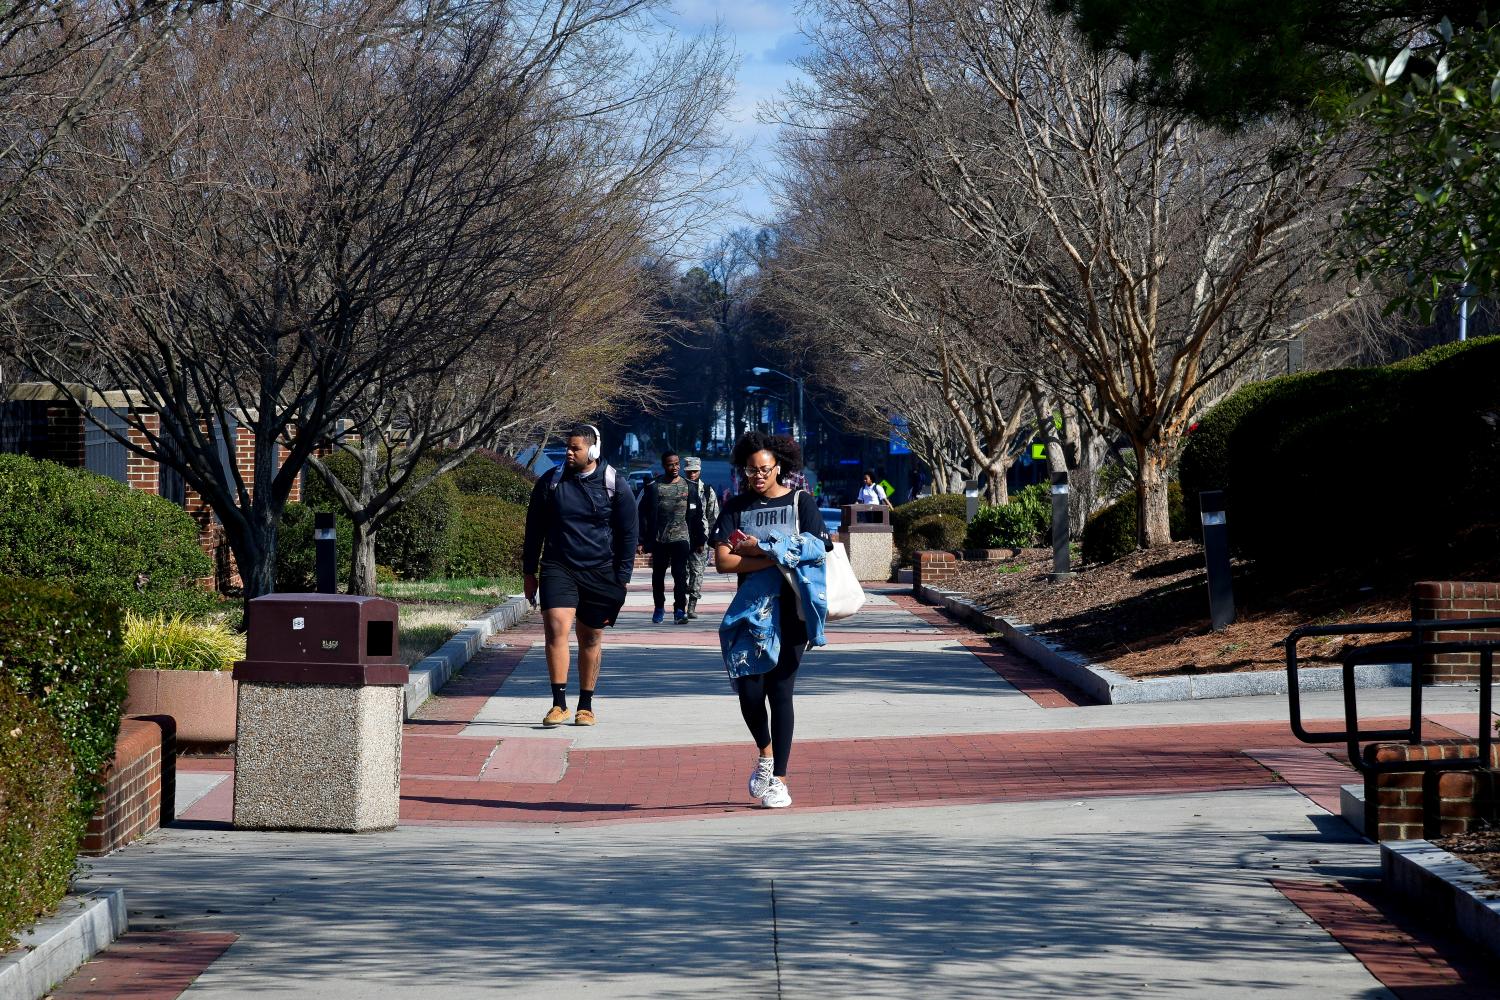 Students walk between classes at North Carolina A&T University along the line that divides Congressional Districts 13 and 6 on campus in Greensboro, North Carolina, U.S. March 14, 2019.  Picture taken March 14, 2019.  REUTERS/Charles Mostoller - RC1B16C59360